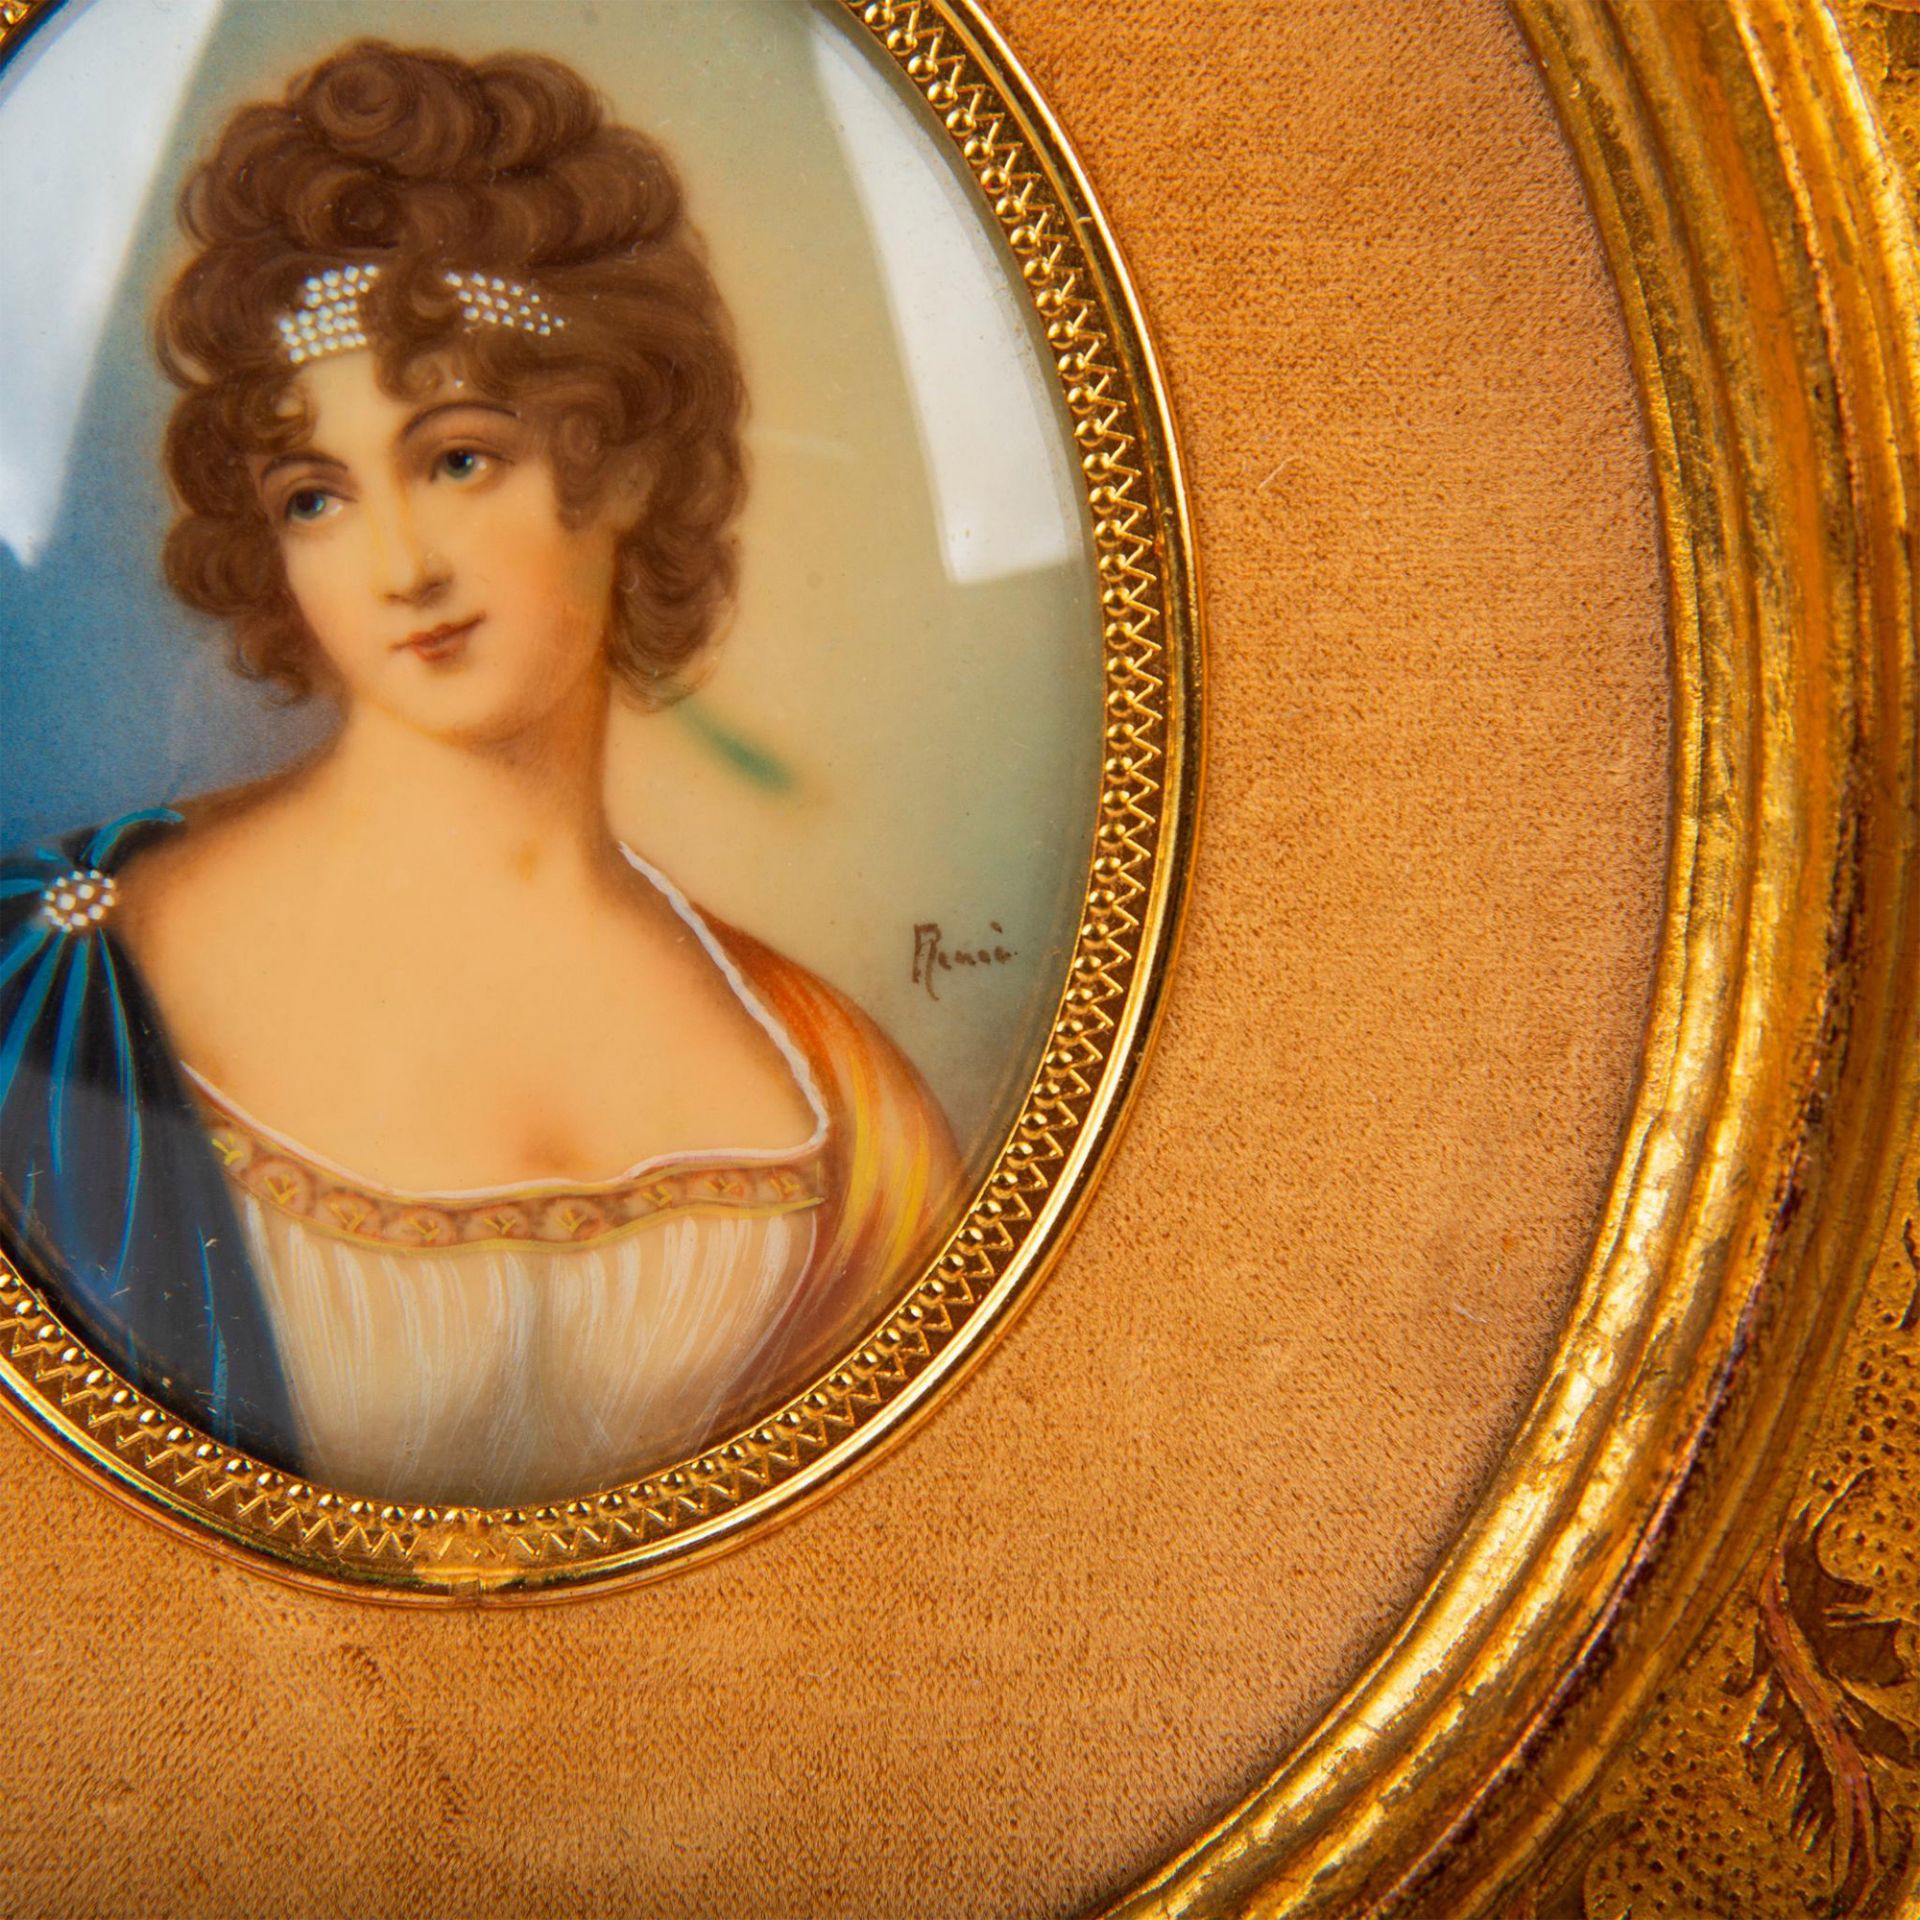 Pair of Antique Signed Framed Lady Portraits - Image 6 of 9